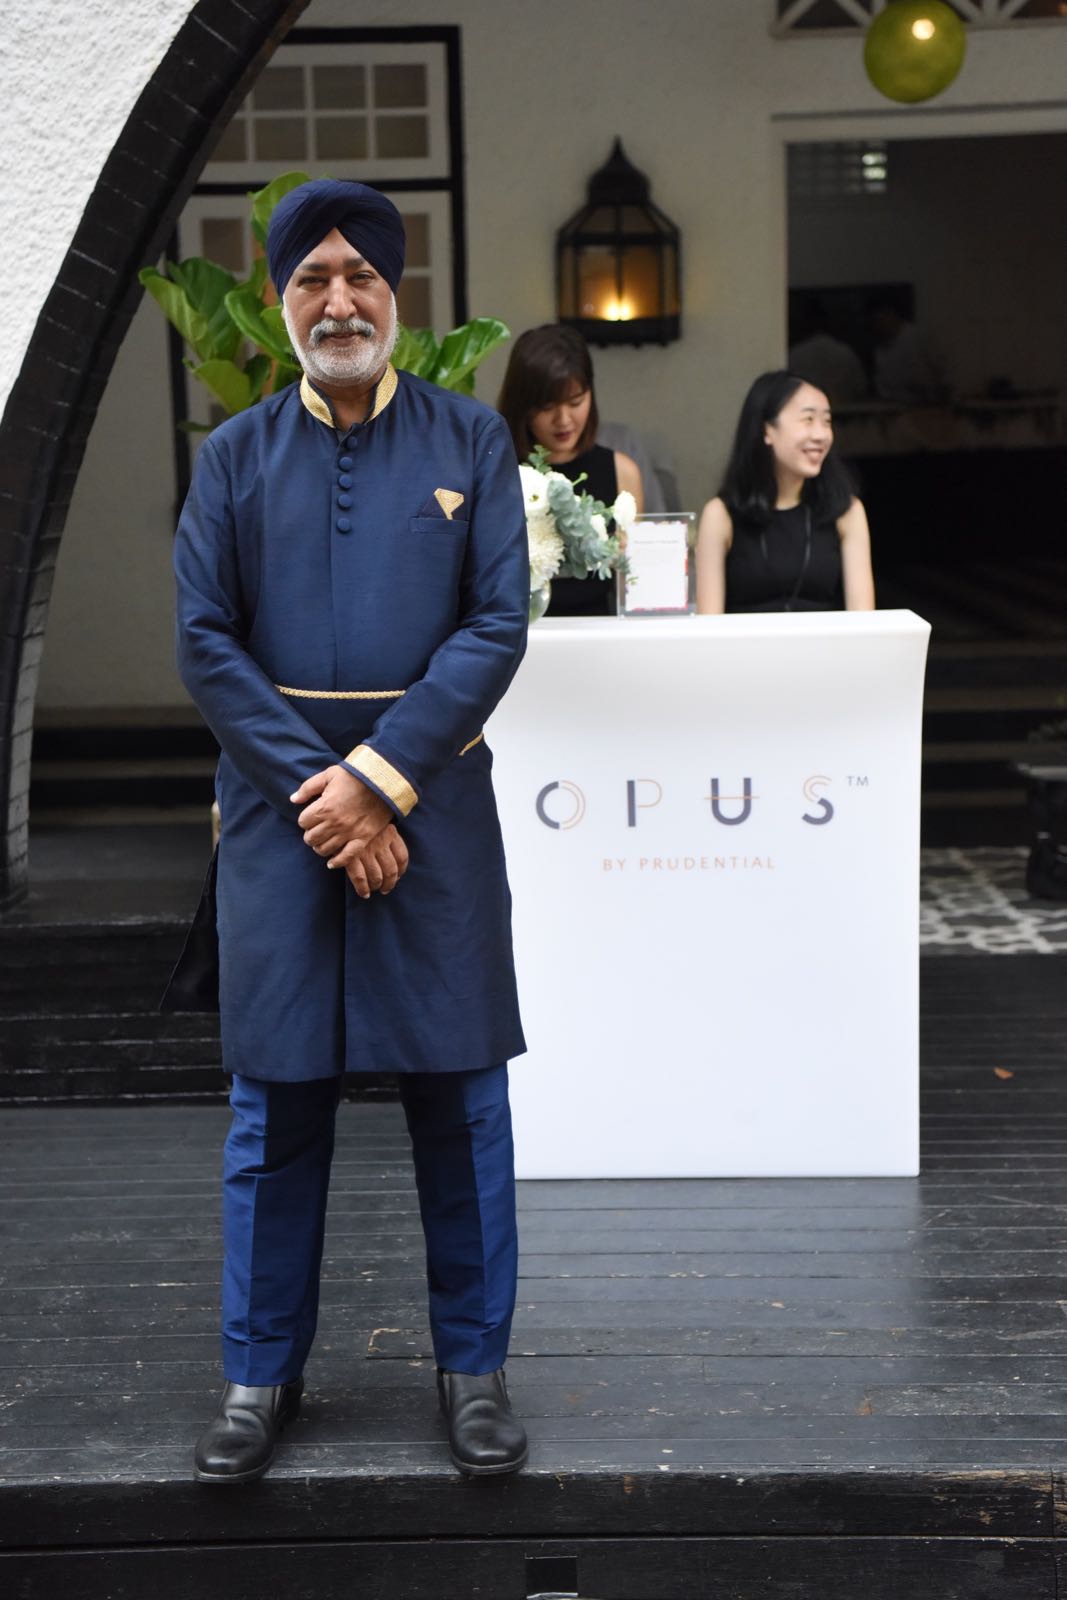 Opus by Prudential Launch Singapore - Raffles butlers